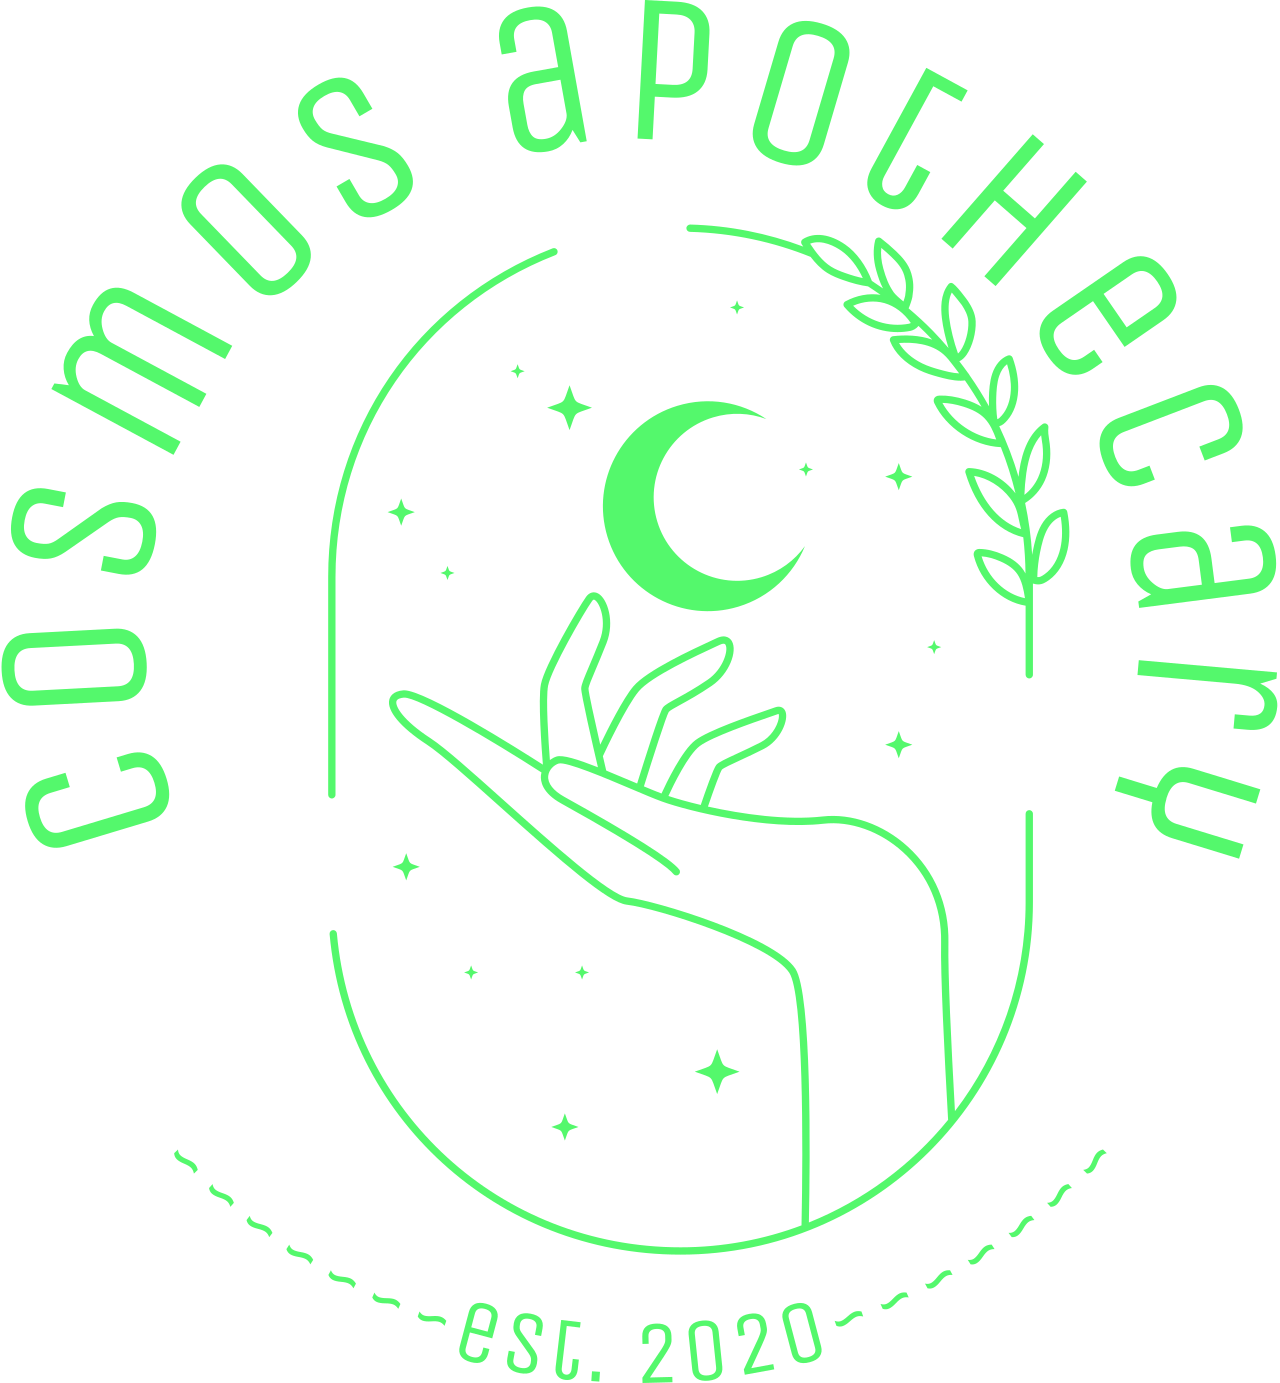 cosmos apothecary's web page